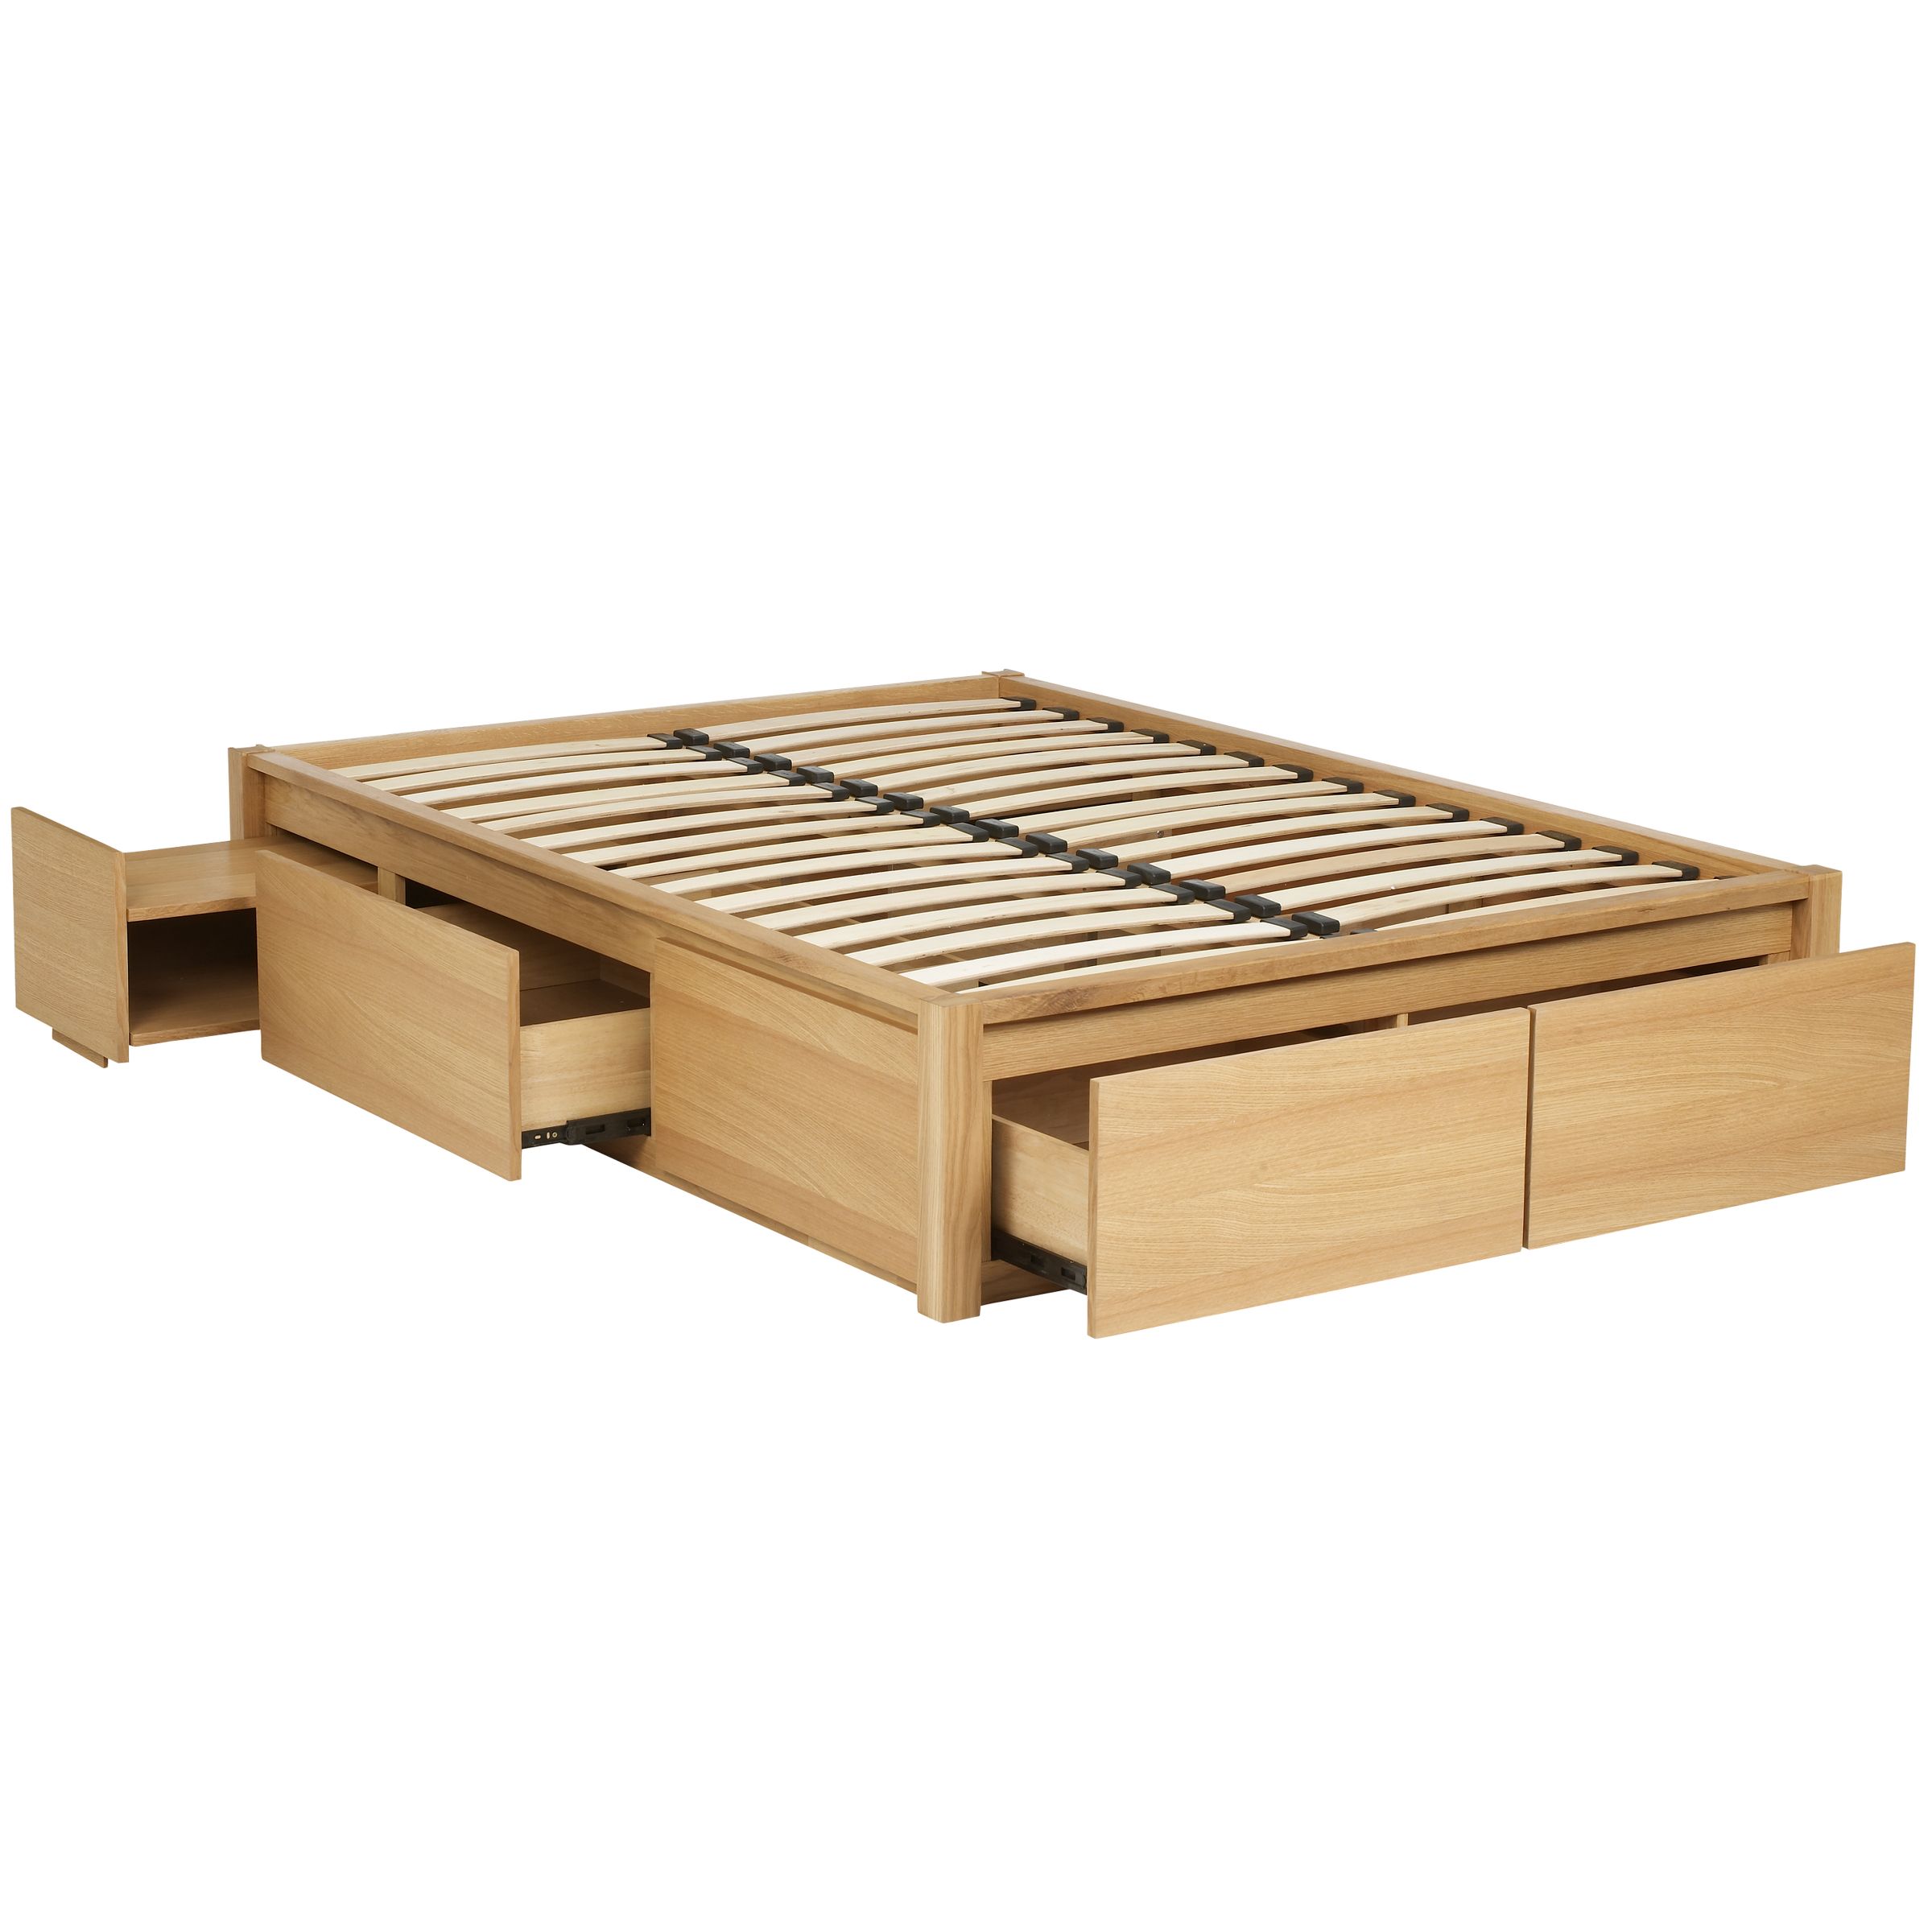 plans for platform bed with storage drawers | Woodworking Project 